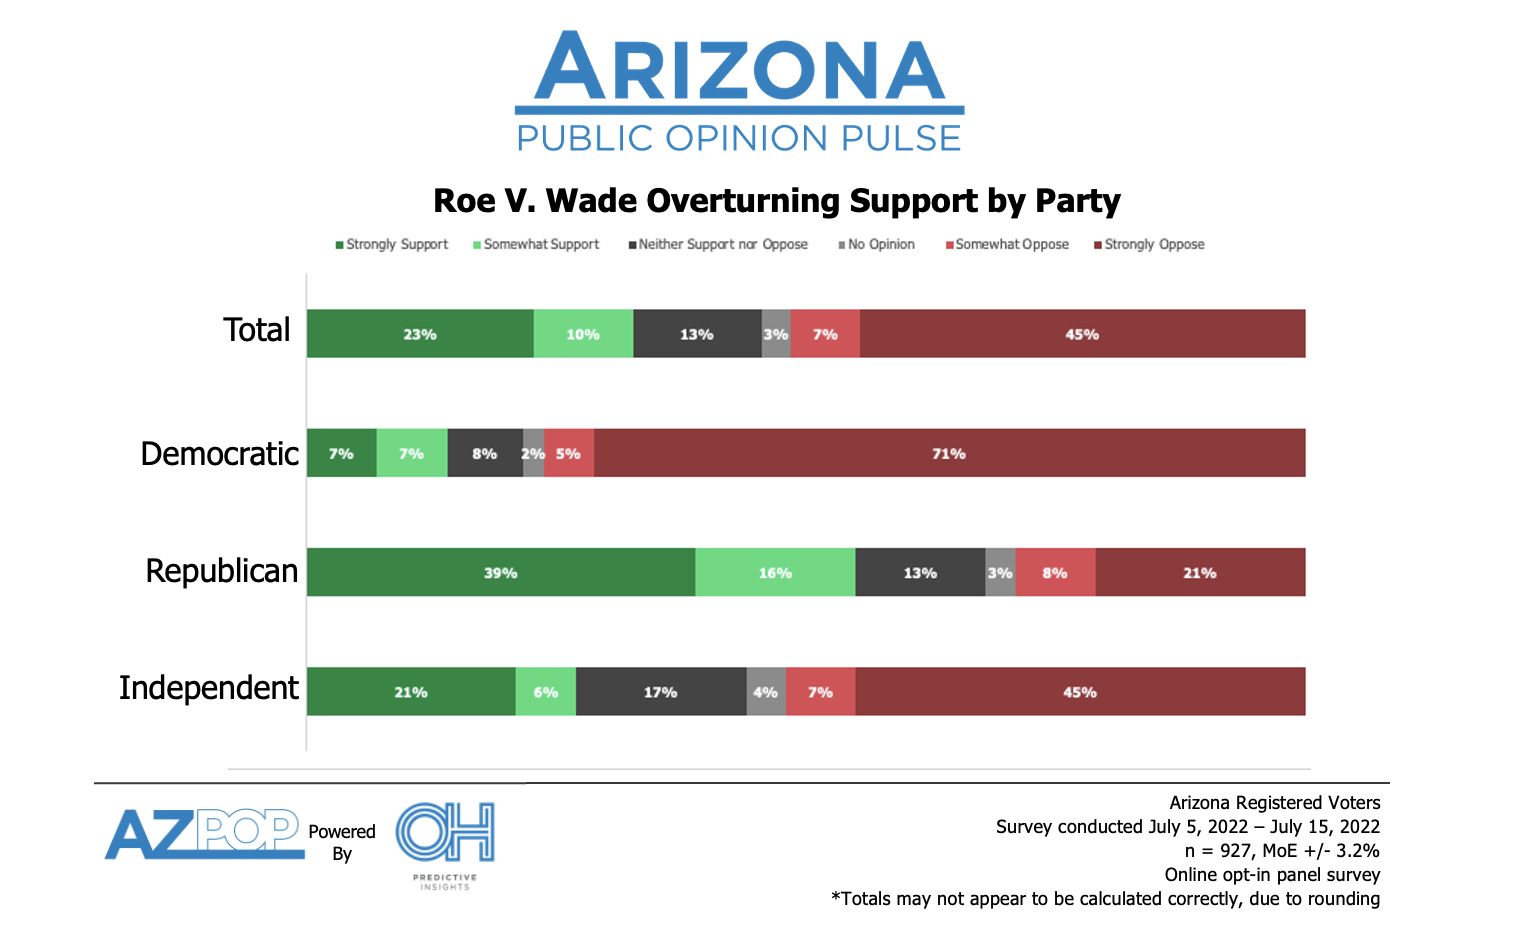 Voting Impact of Supreme Court Ruling on Abortion in Arizona